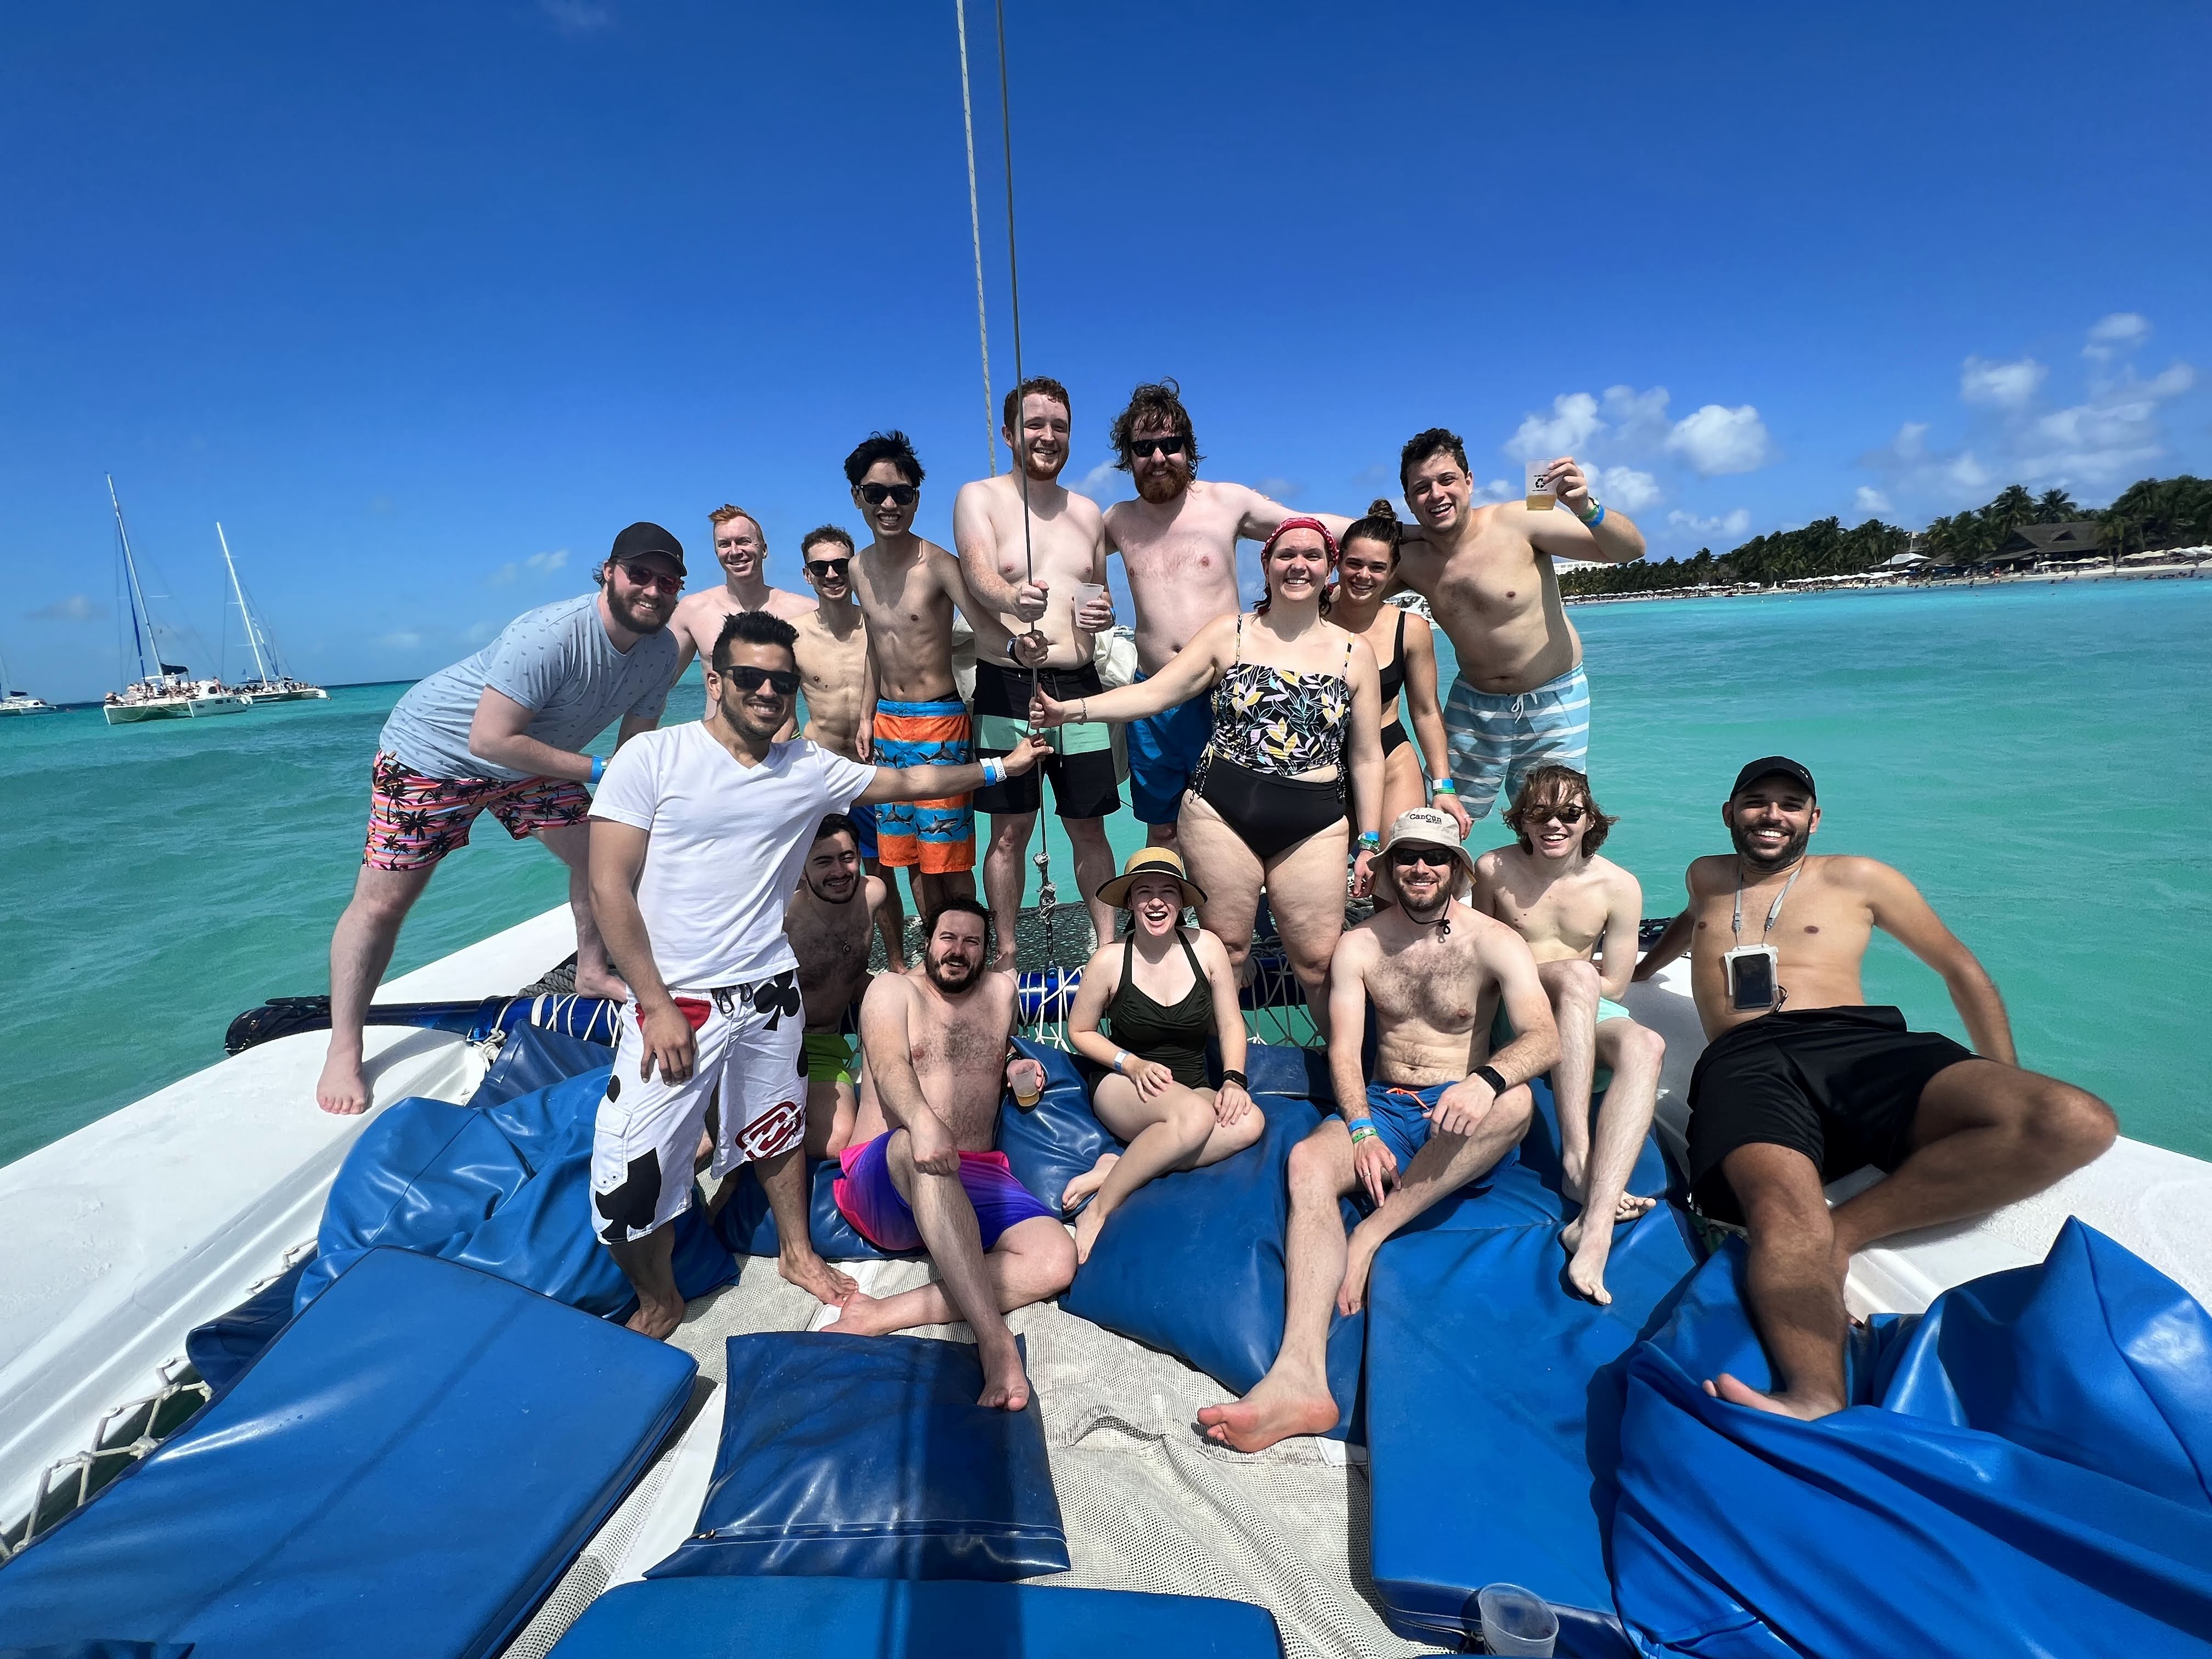 Enjoying the beautiful water off the coast of Isla Mujeres
               with the best team I could dream of